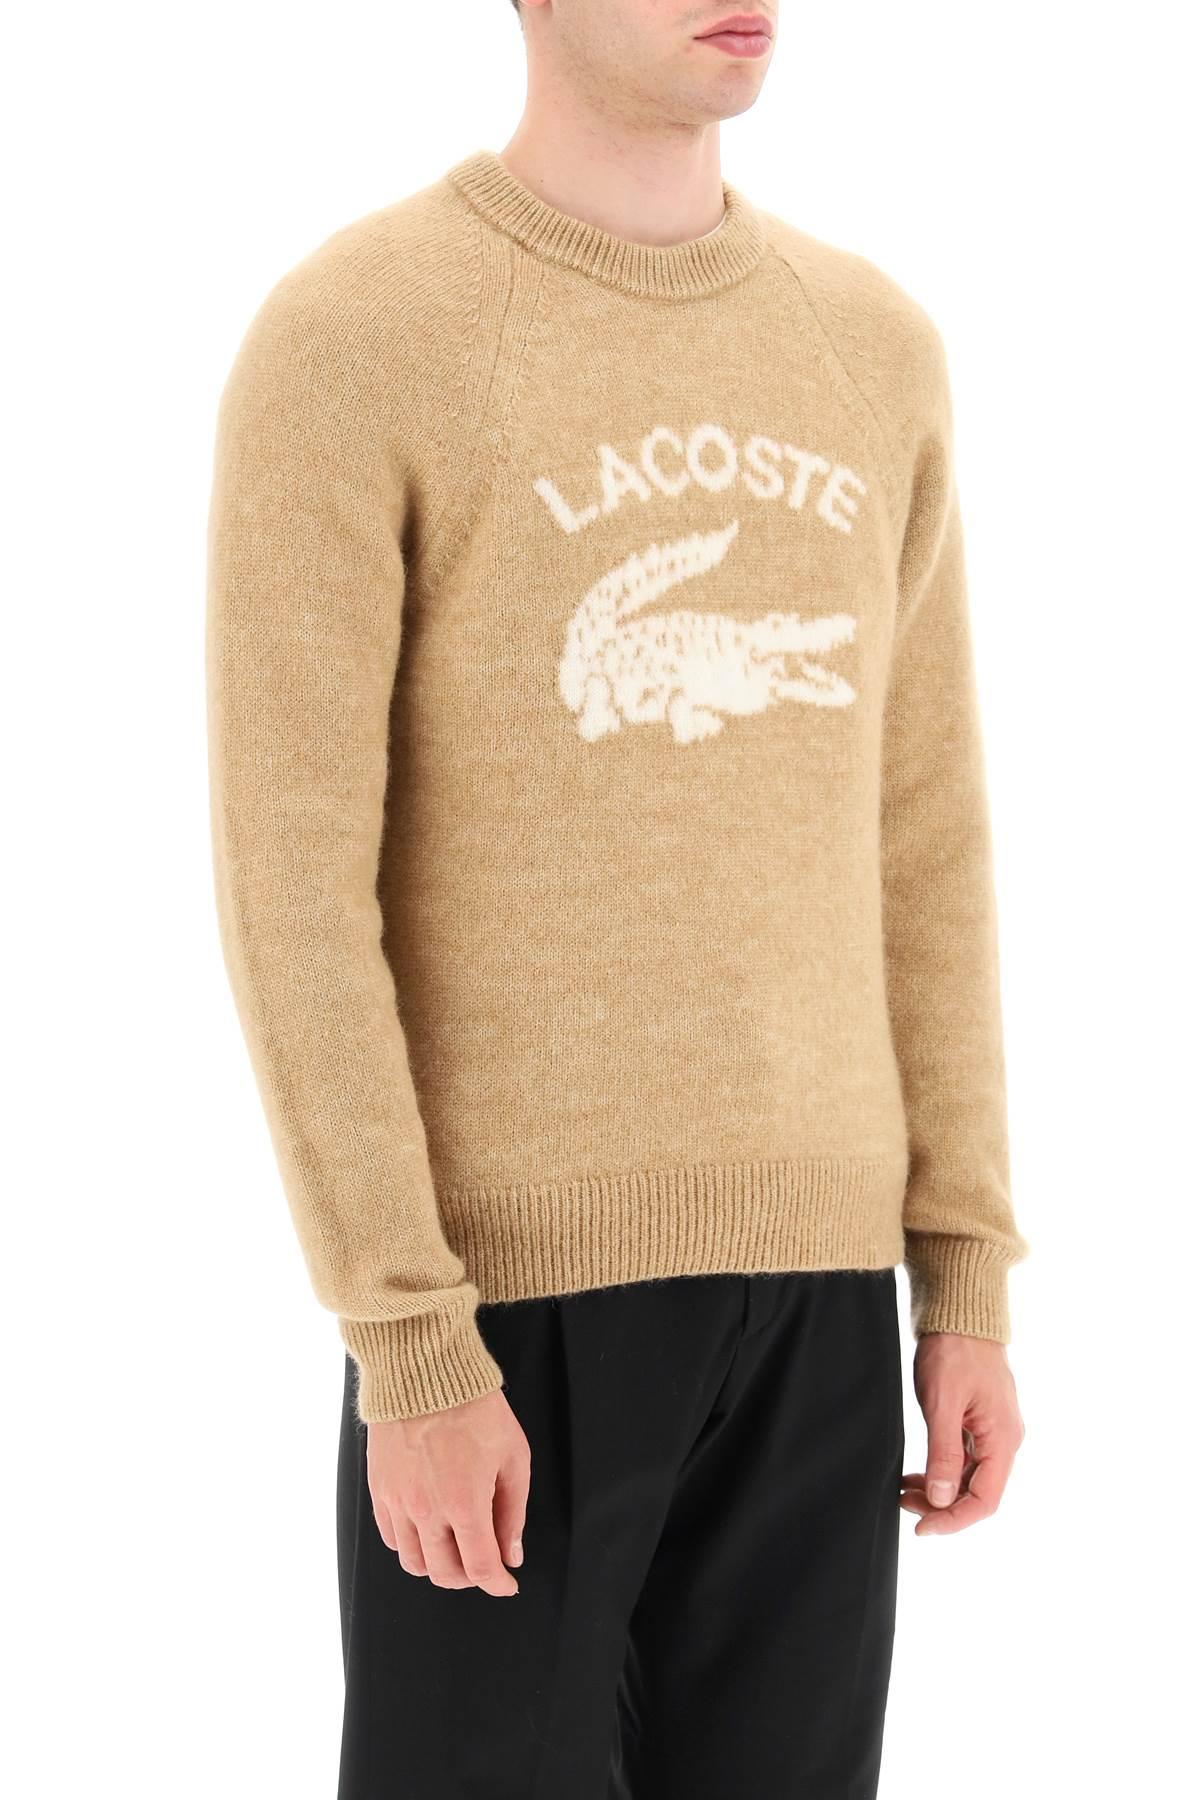 Lacoste Logo Intarsia Alpaca Blend Sweater in Natural for Men | Lyst